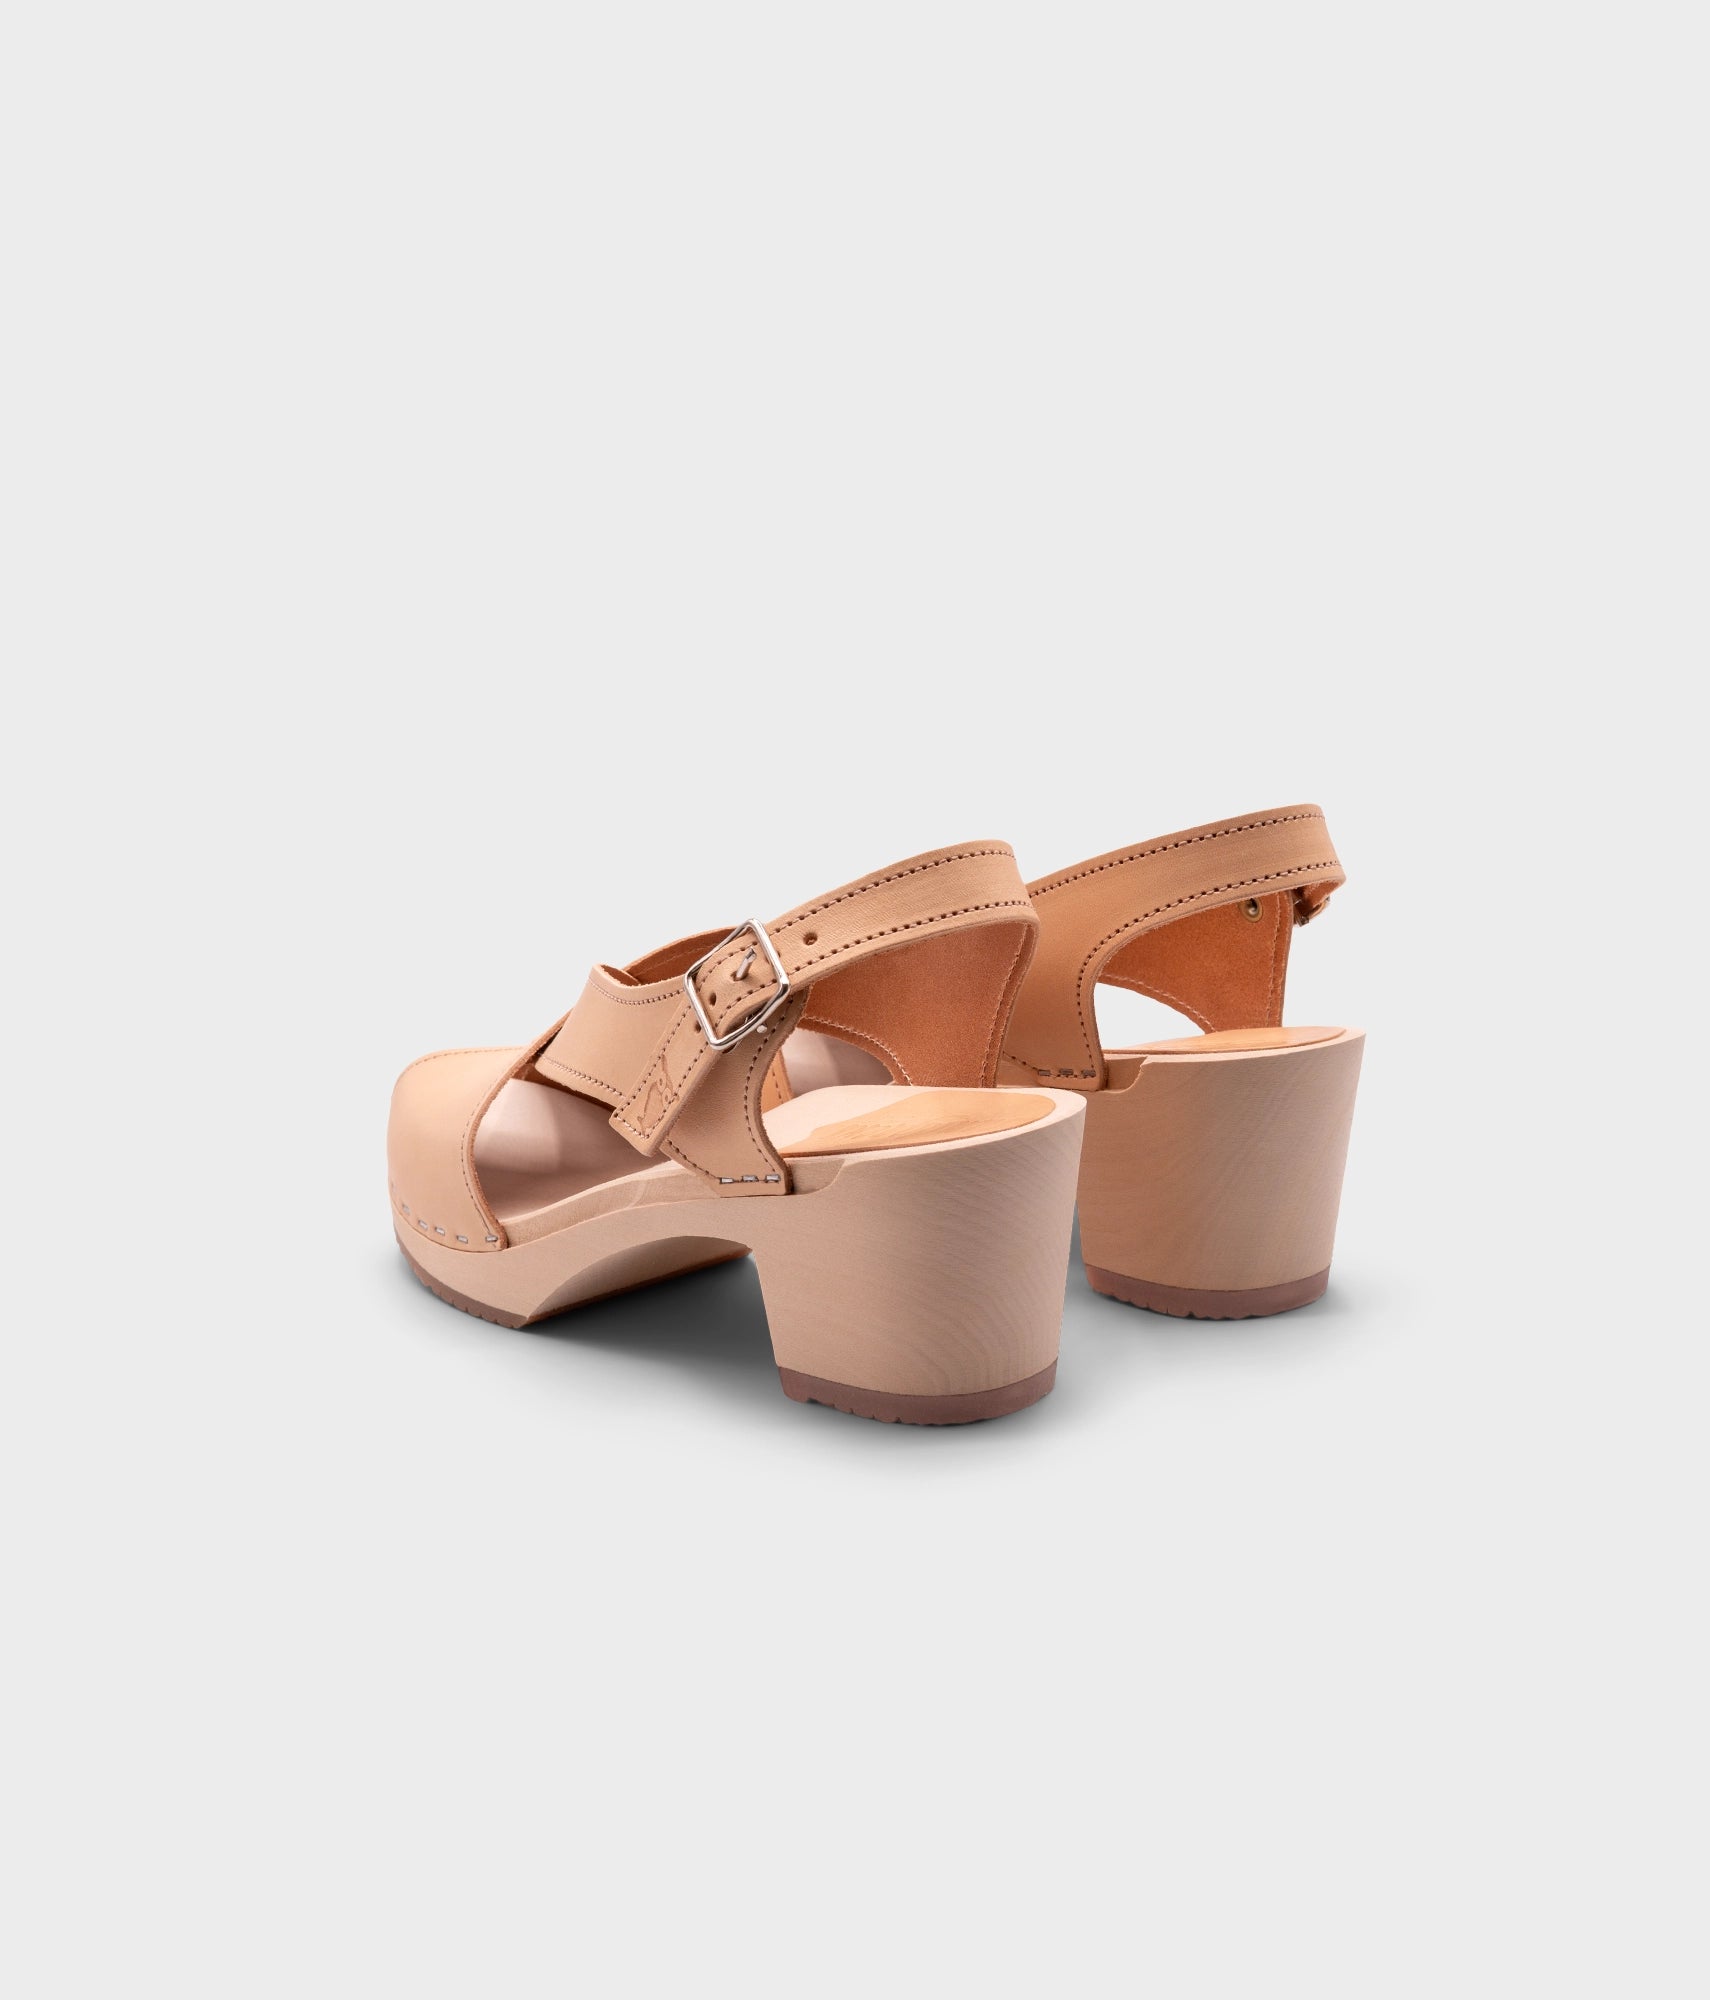 high heeled criss cross clog sandals in ecru beige vegetable tanned leather stapled on a light wooden base